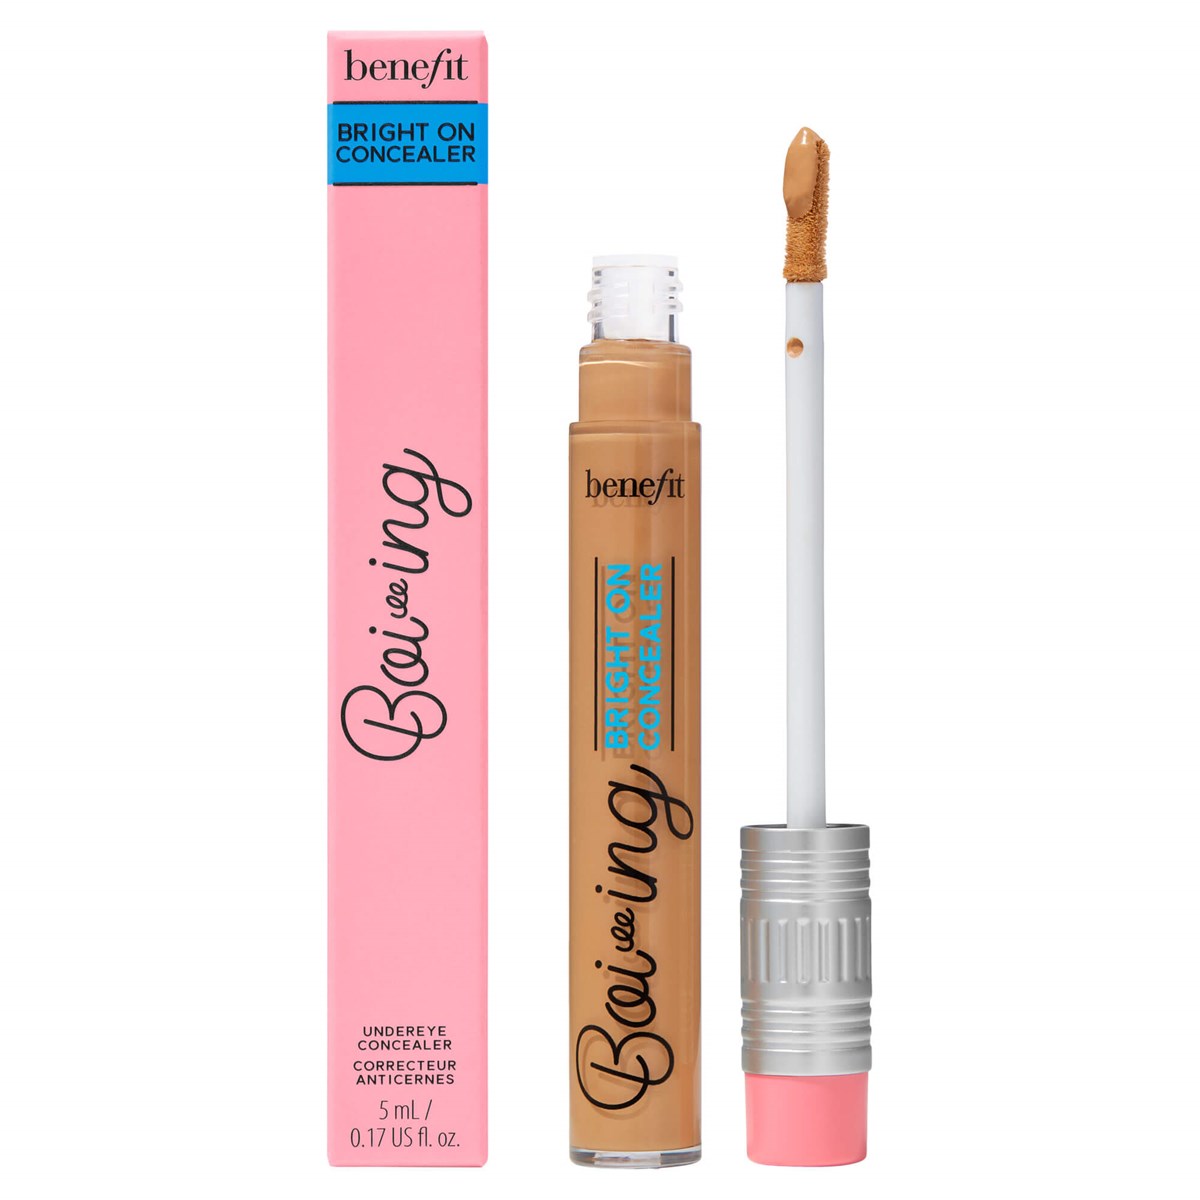 Benefit "Boi-ing Bright On" Concealer Almond shade